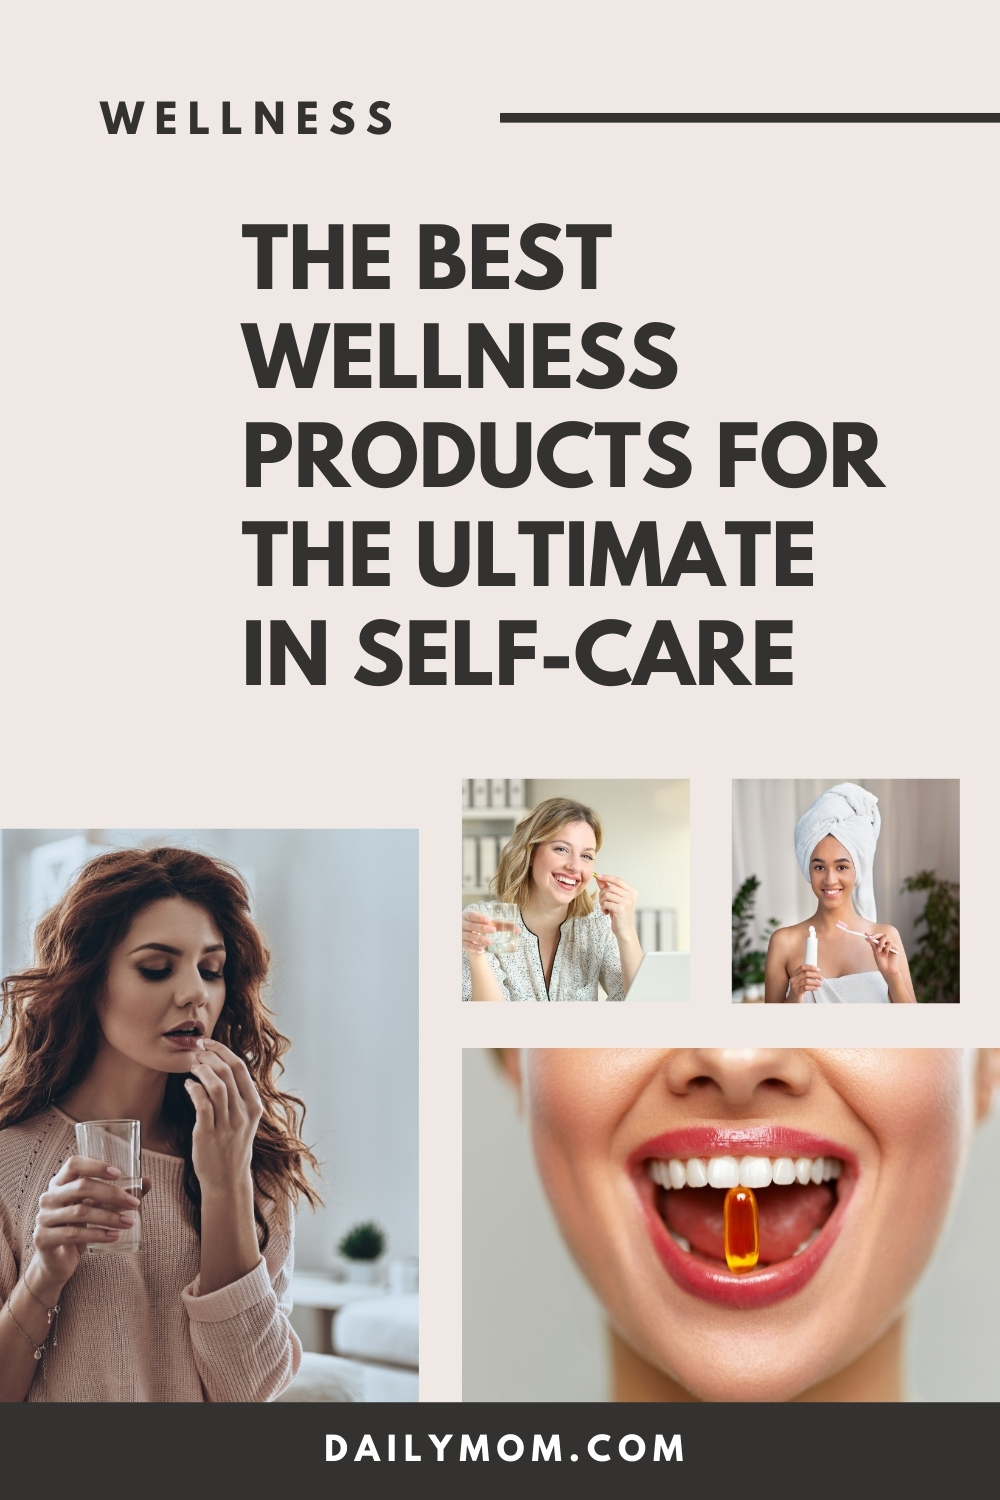 26 Of The Best Wellness Products For The Ultimate In Self-care 